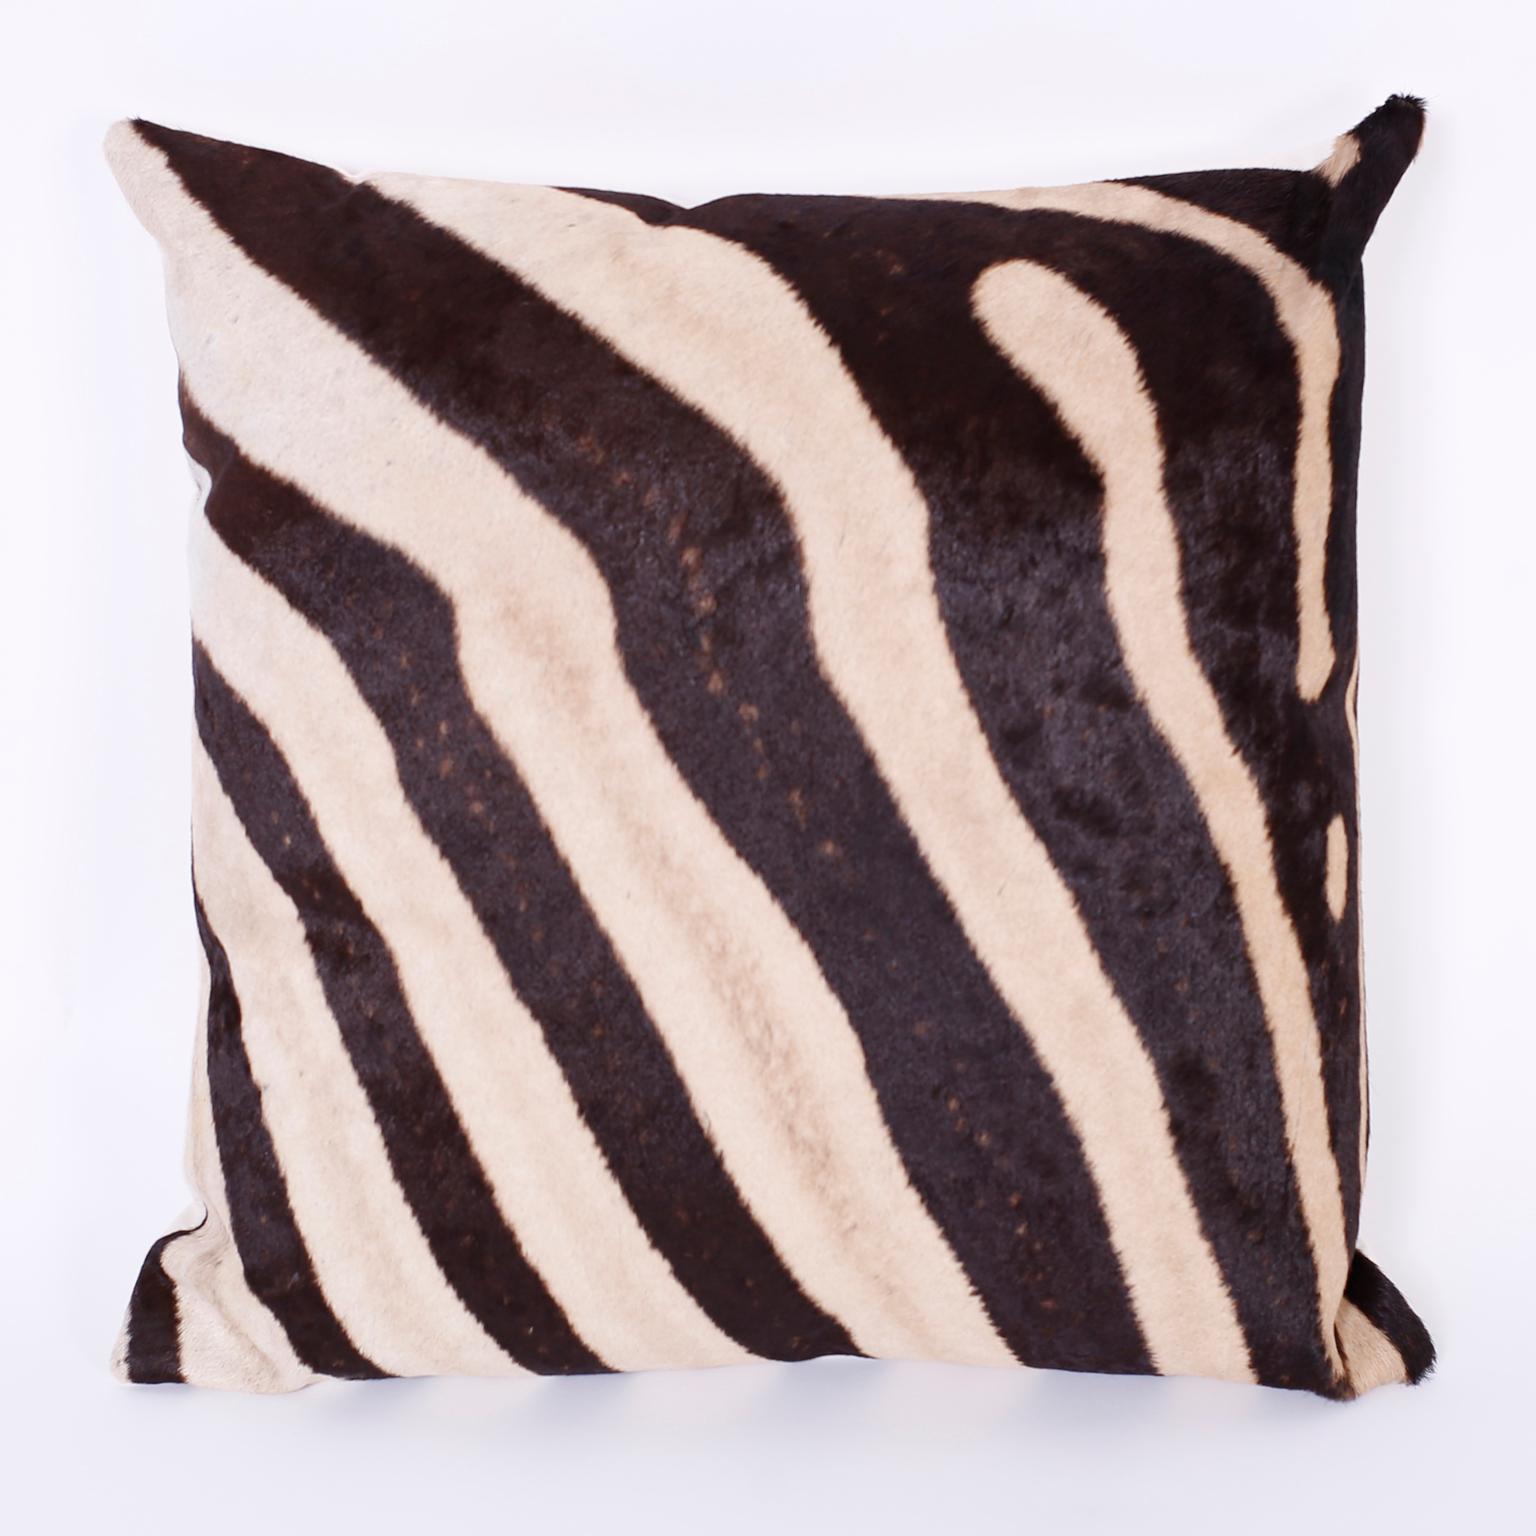 Pair of zebra hide pillows with linen backs and discreet zippers in a seam. Priced individually.